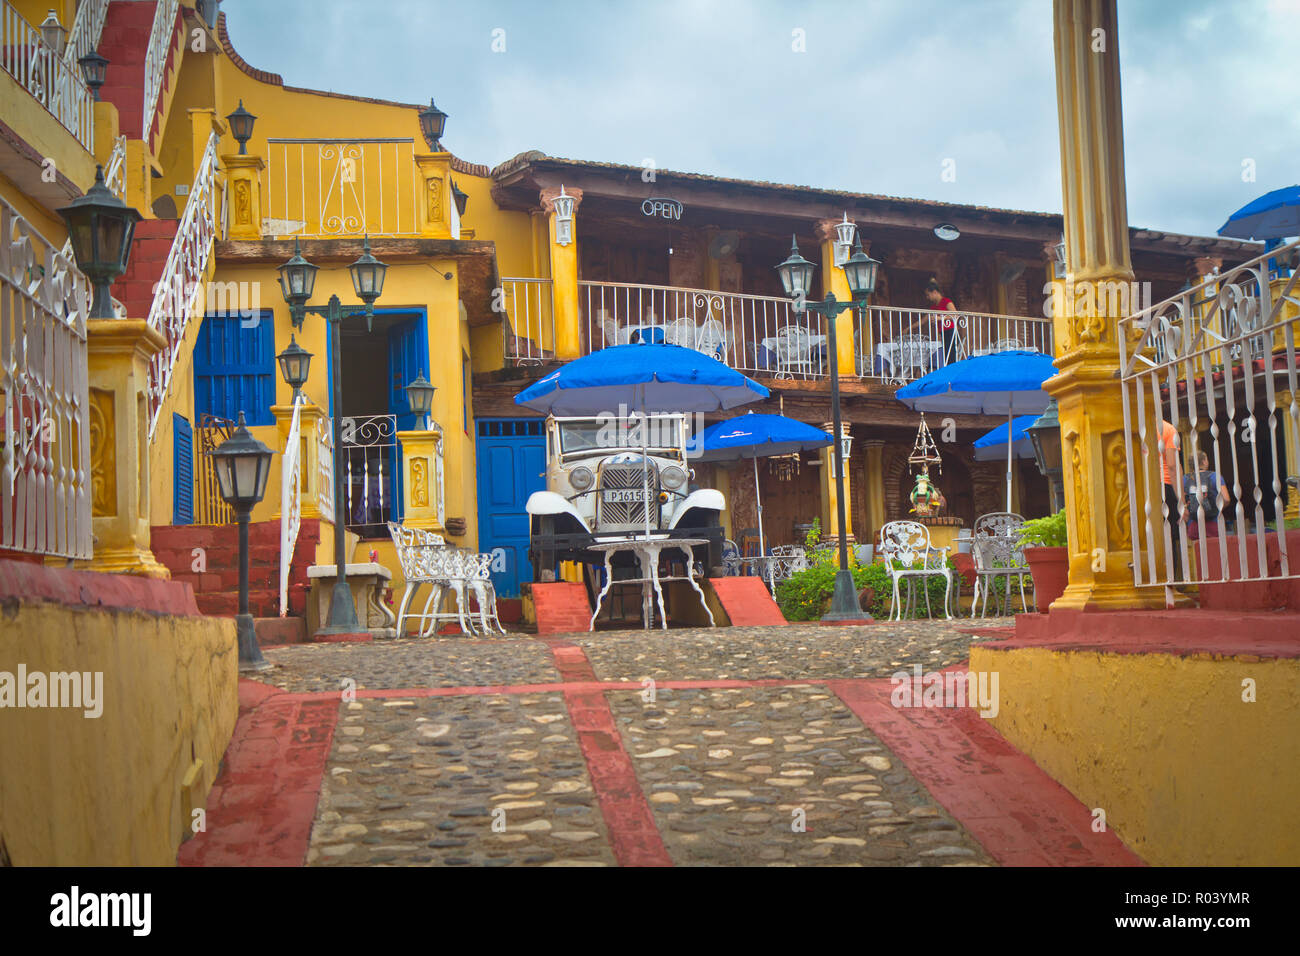 Trinidad is a town in central Cuba, known for its colonial old town and cobblestone streets. Stock Photo